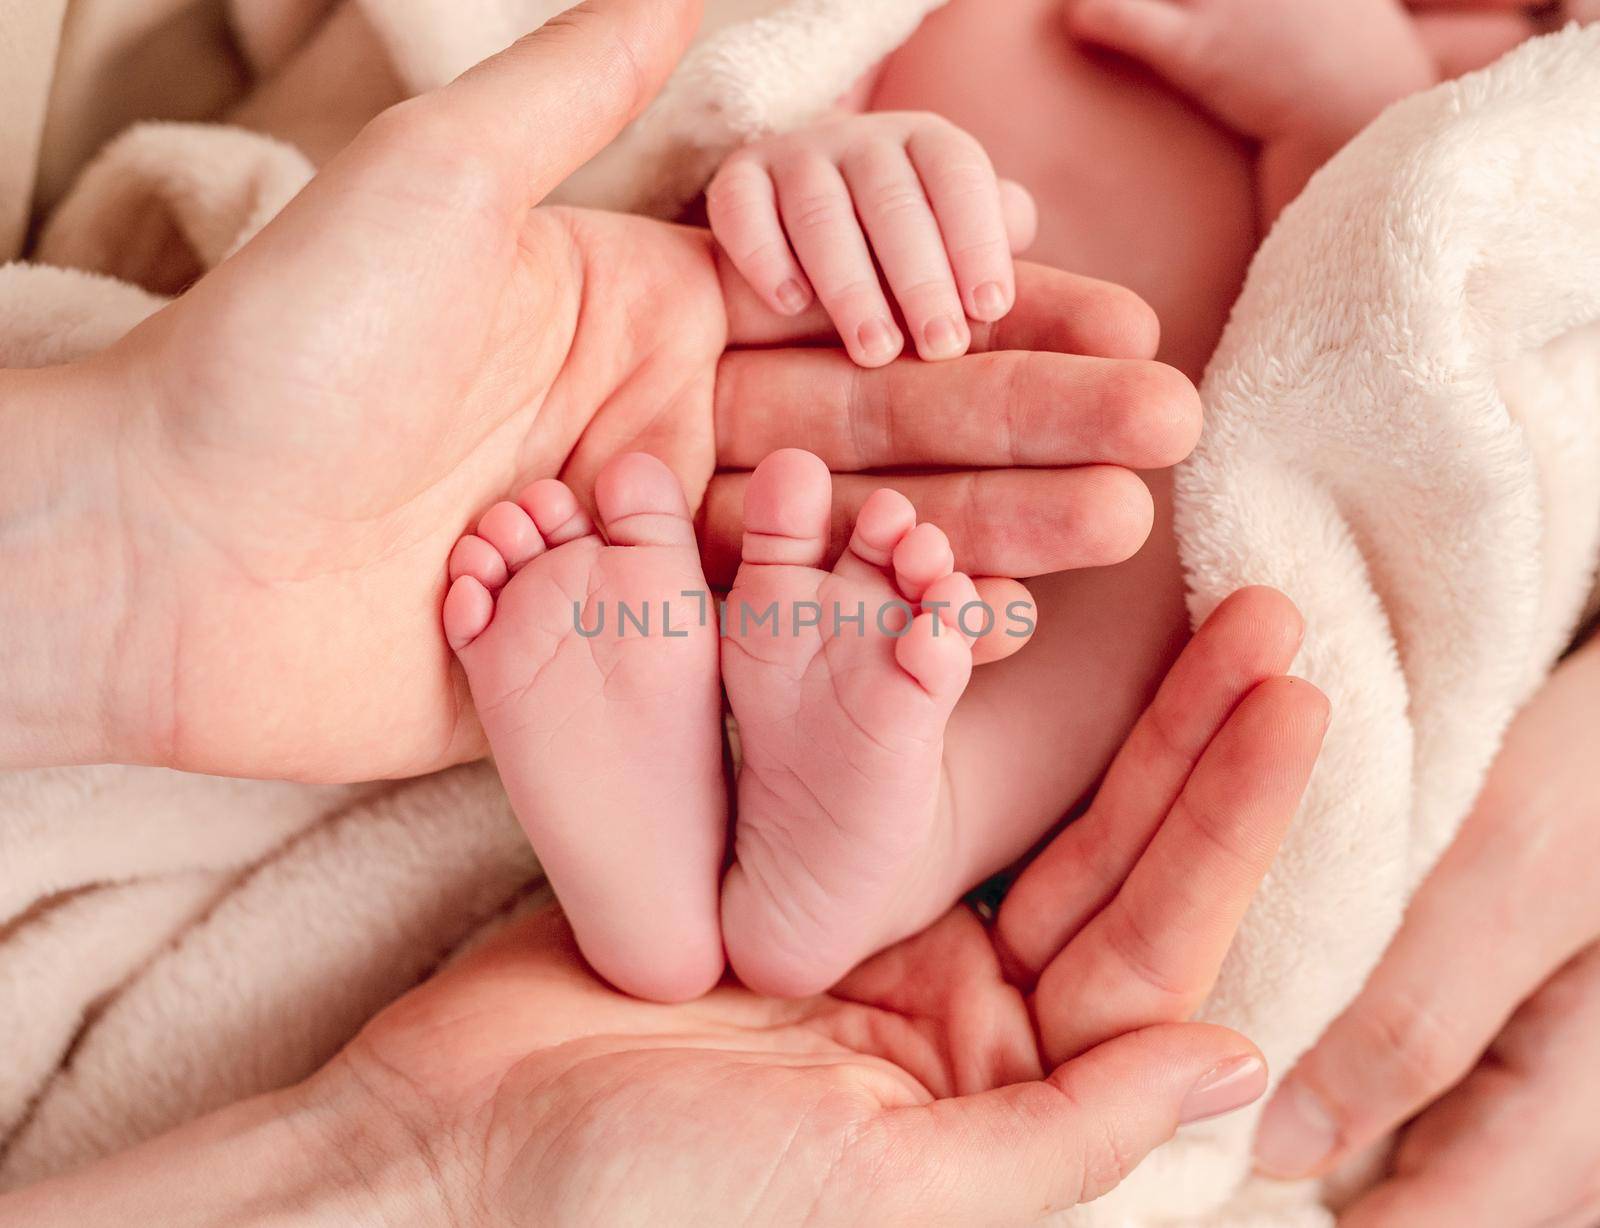 Bare feet of newborn surrounded by family members hands by tan4ikk1